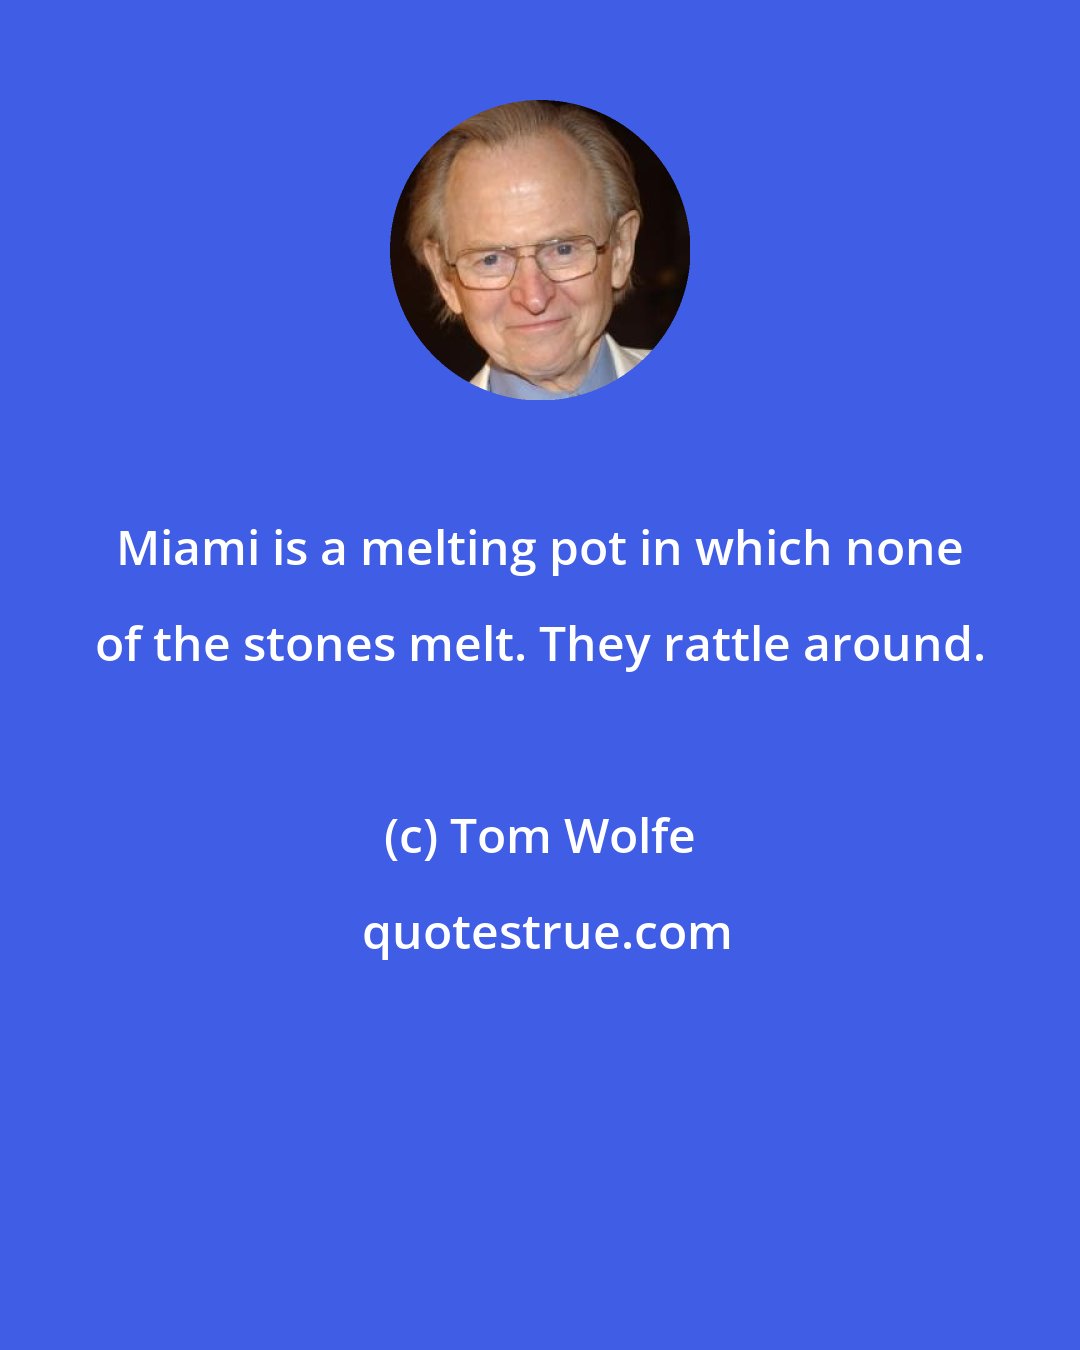 Tom Wolfe: Miami is a melting pot in which none of the stones melt. They rattle around.